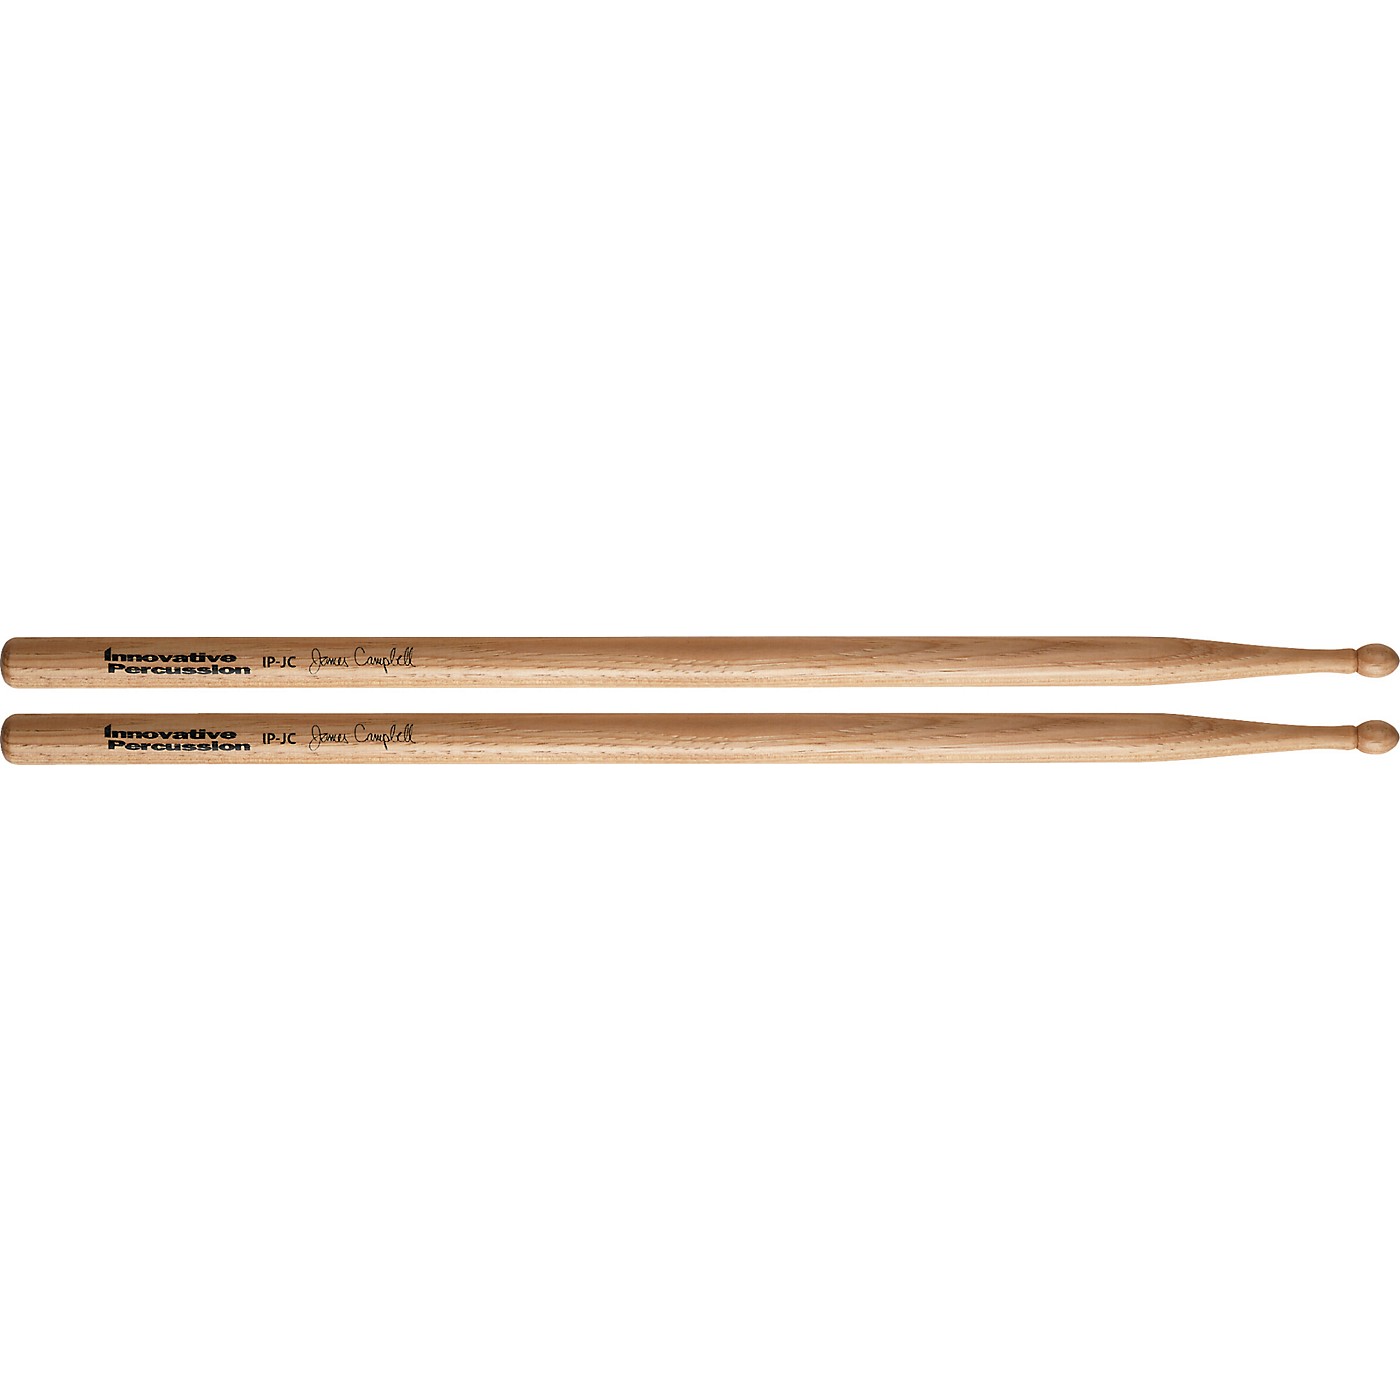 Innovative Percussion Hickory Concert Drumsticks James Campbell thumbnail